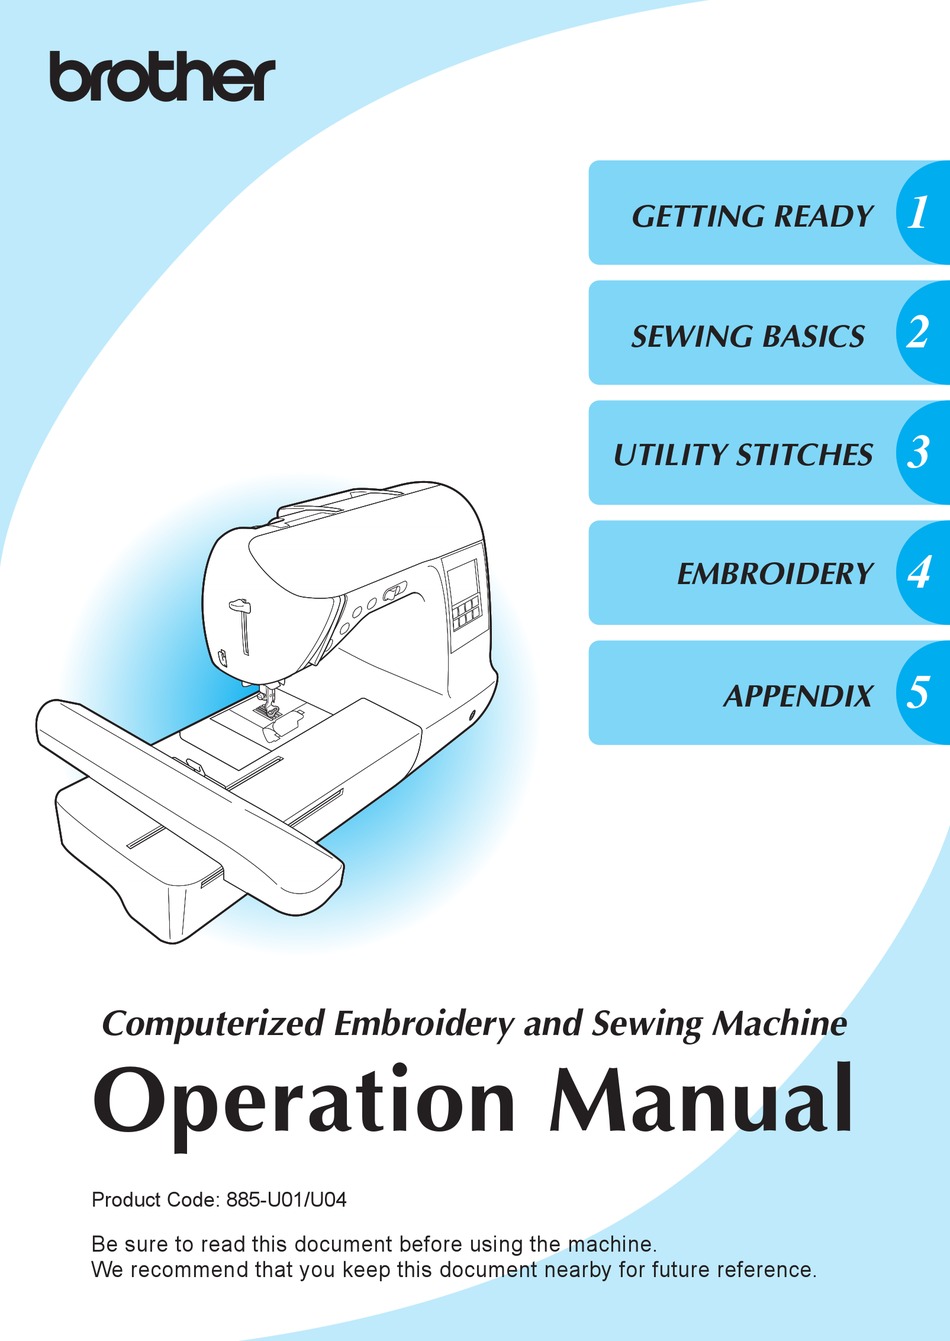 BROTHER SE700 OPERATION MANUAL Pdf Download